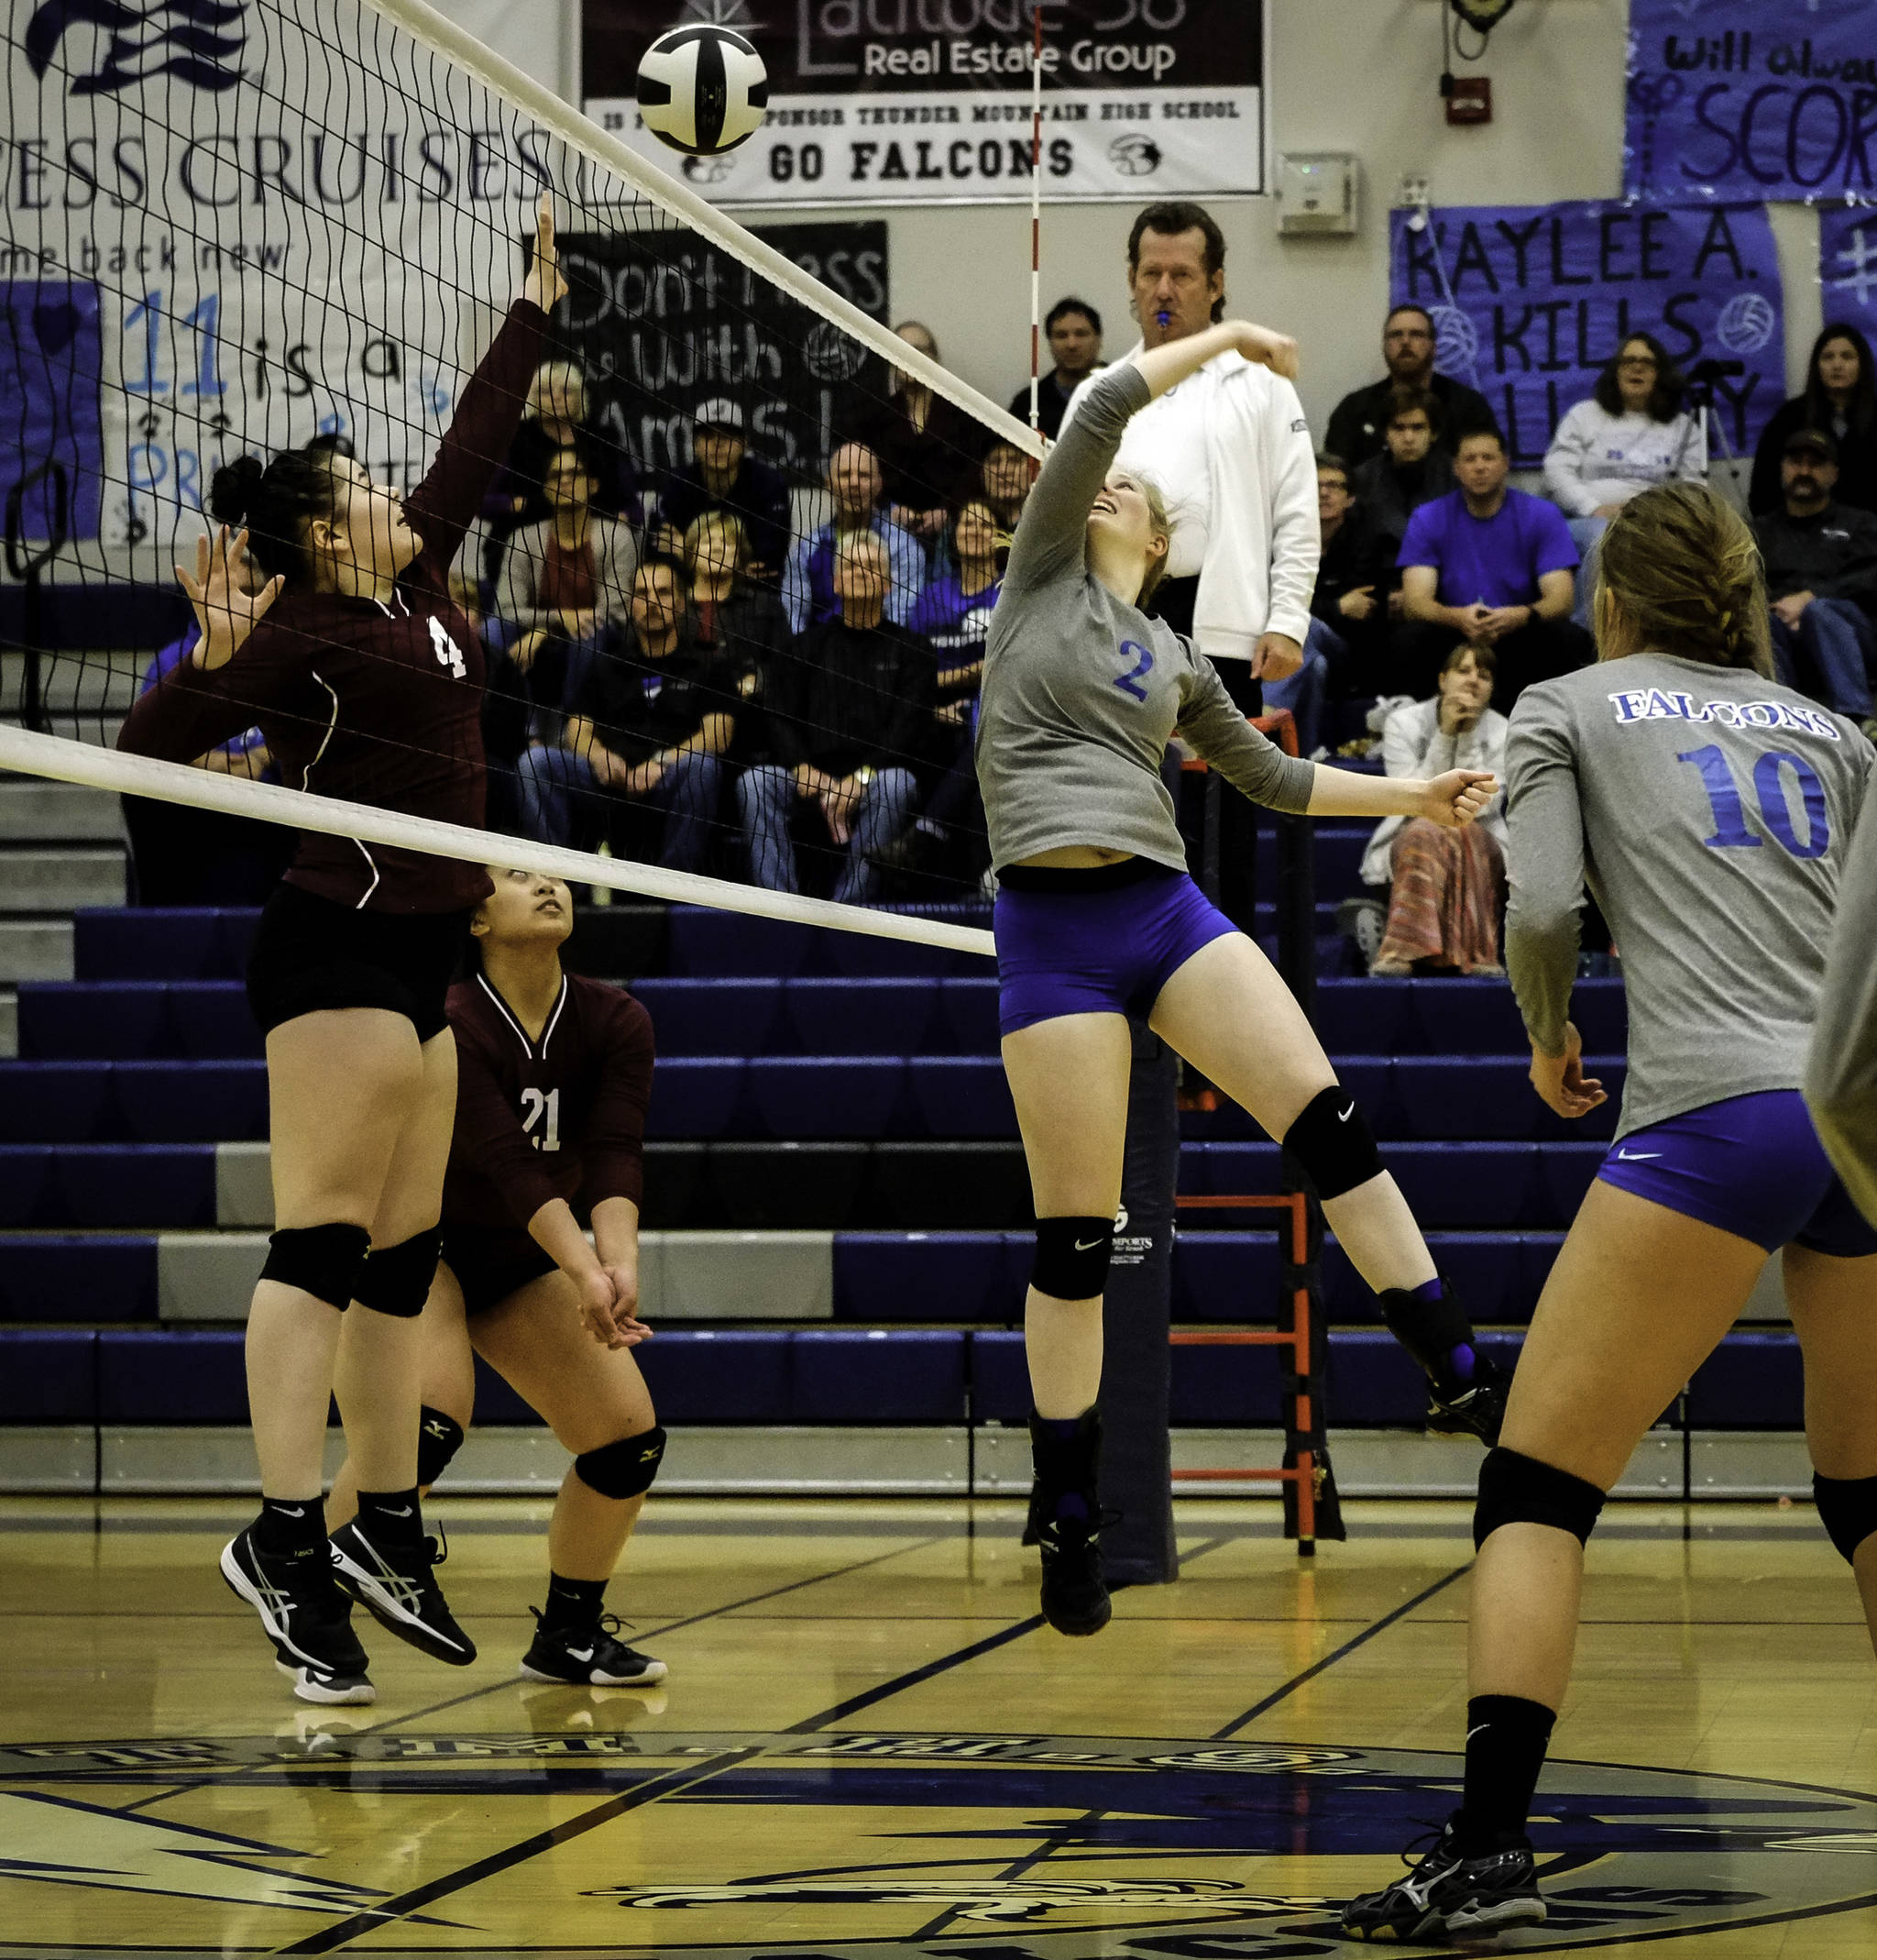 Thunder Mountain’s Mary Landes, right, and Autumn Yeisley, left, of Ketchikan face off at the net during their game Friday at TMHS. The Falcons won in straight sets, 3-0. (Lance Nesbitt | For the Juneau Empire)